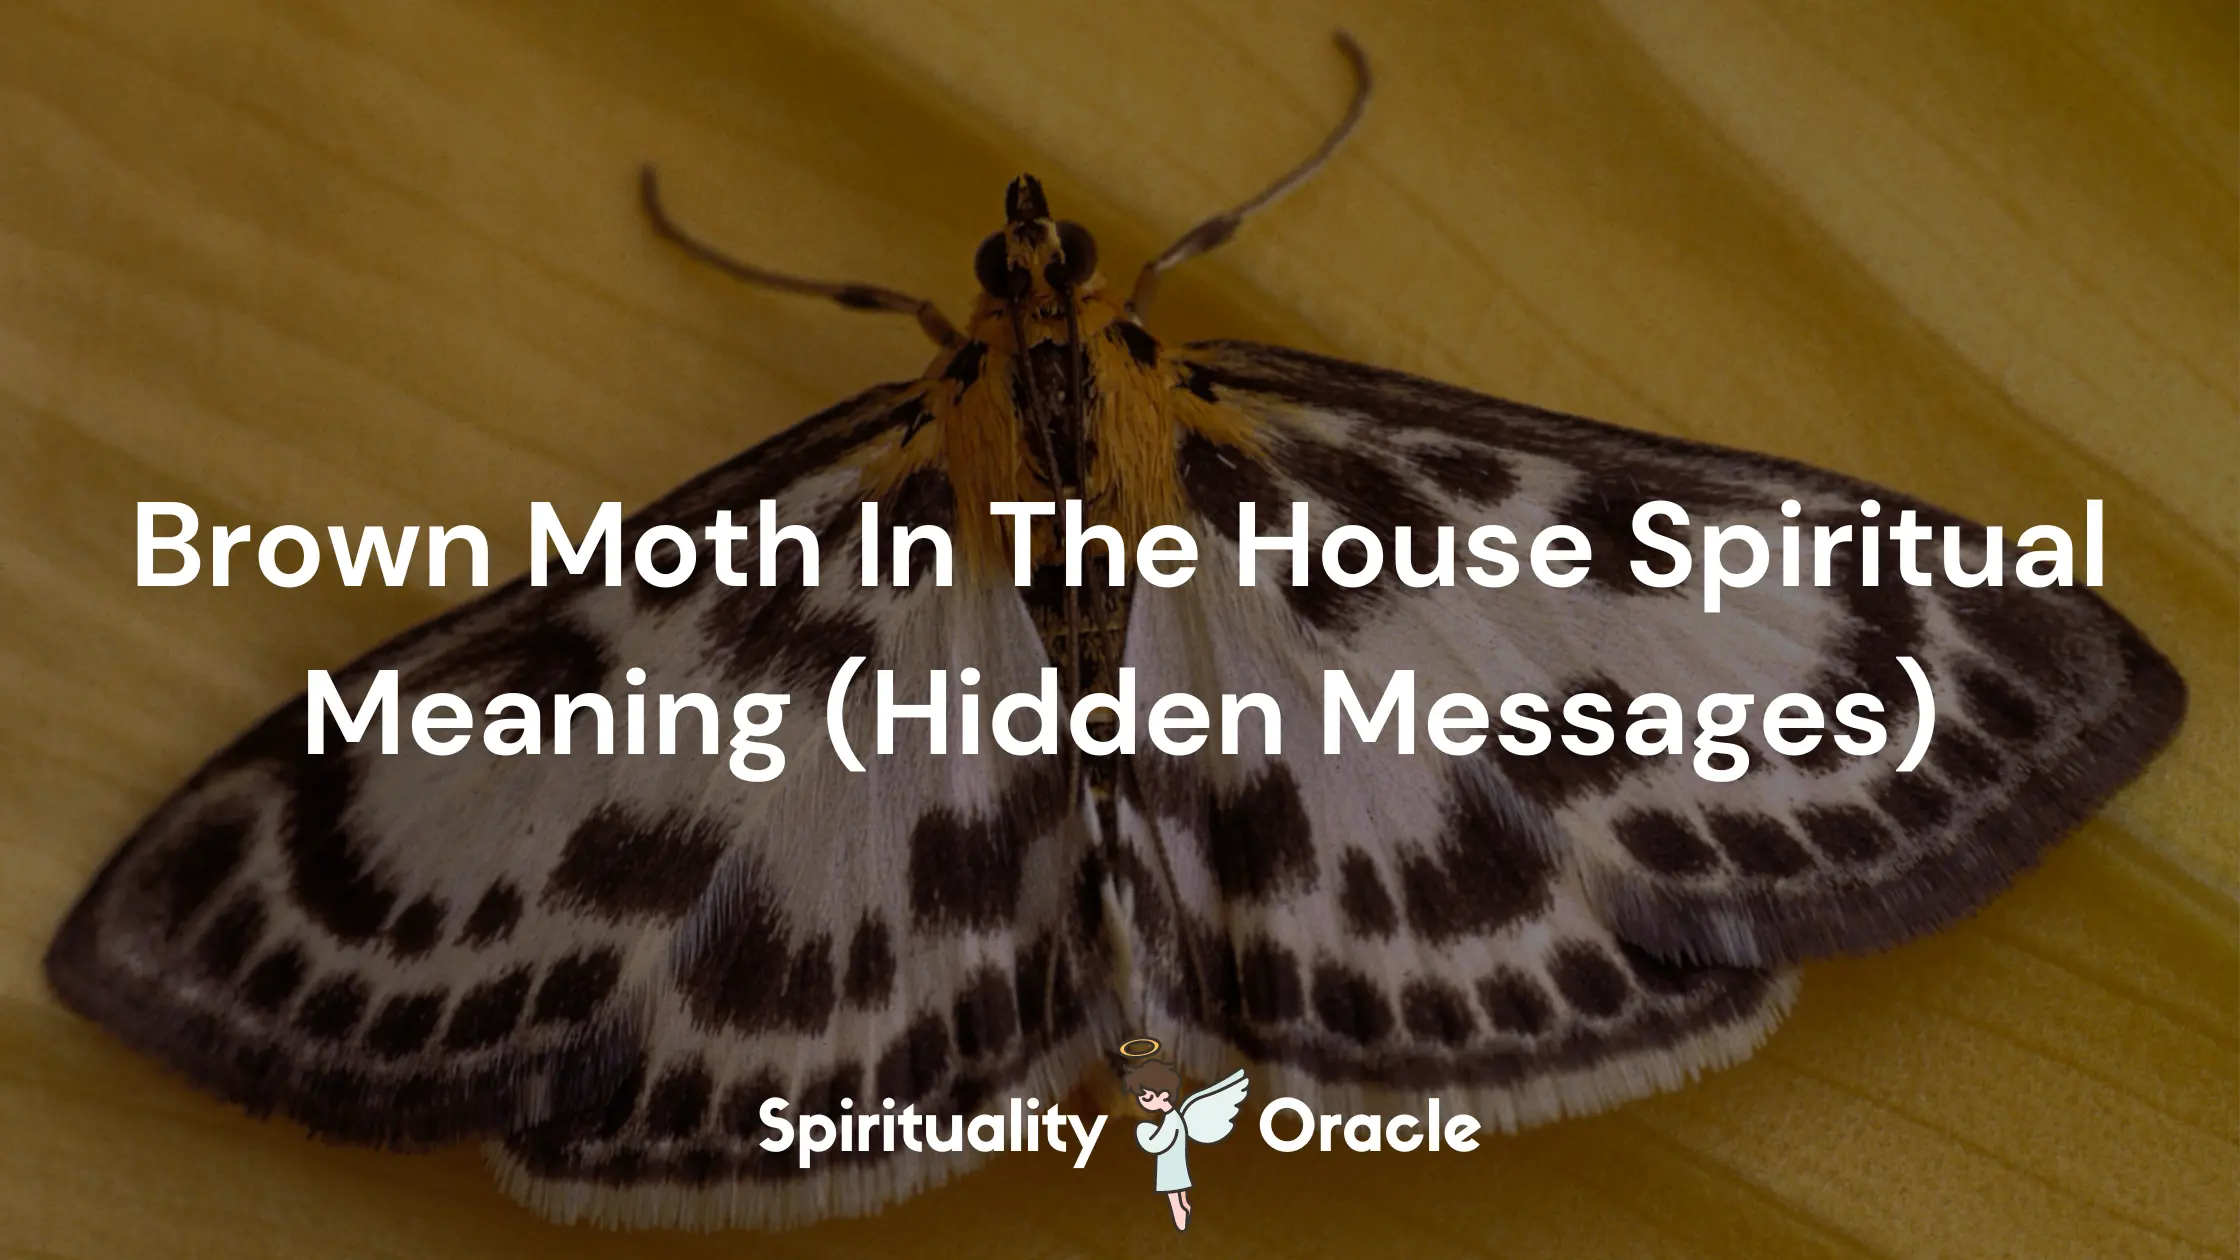 Brown Moth In The House Spiritual Meaning